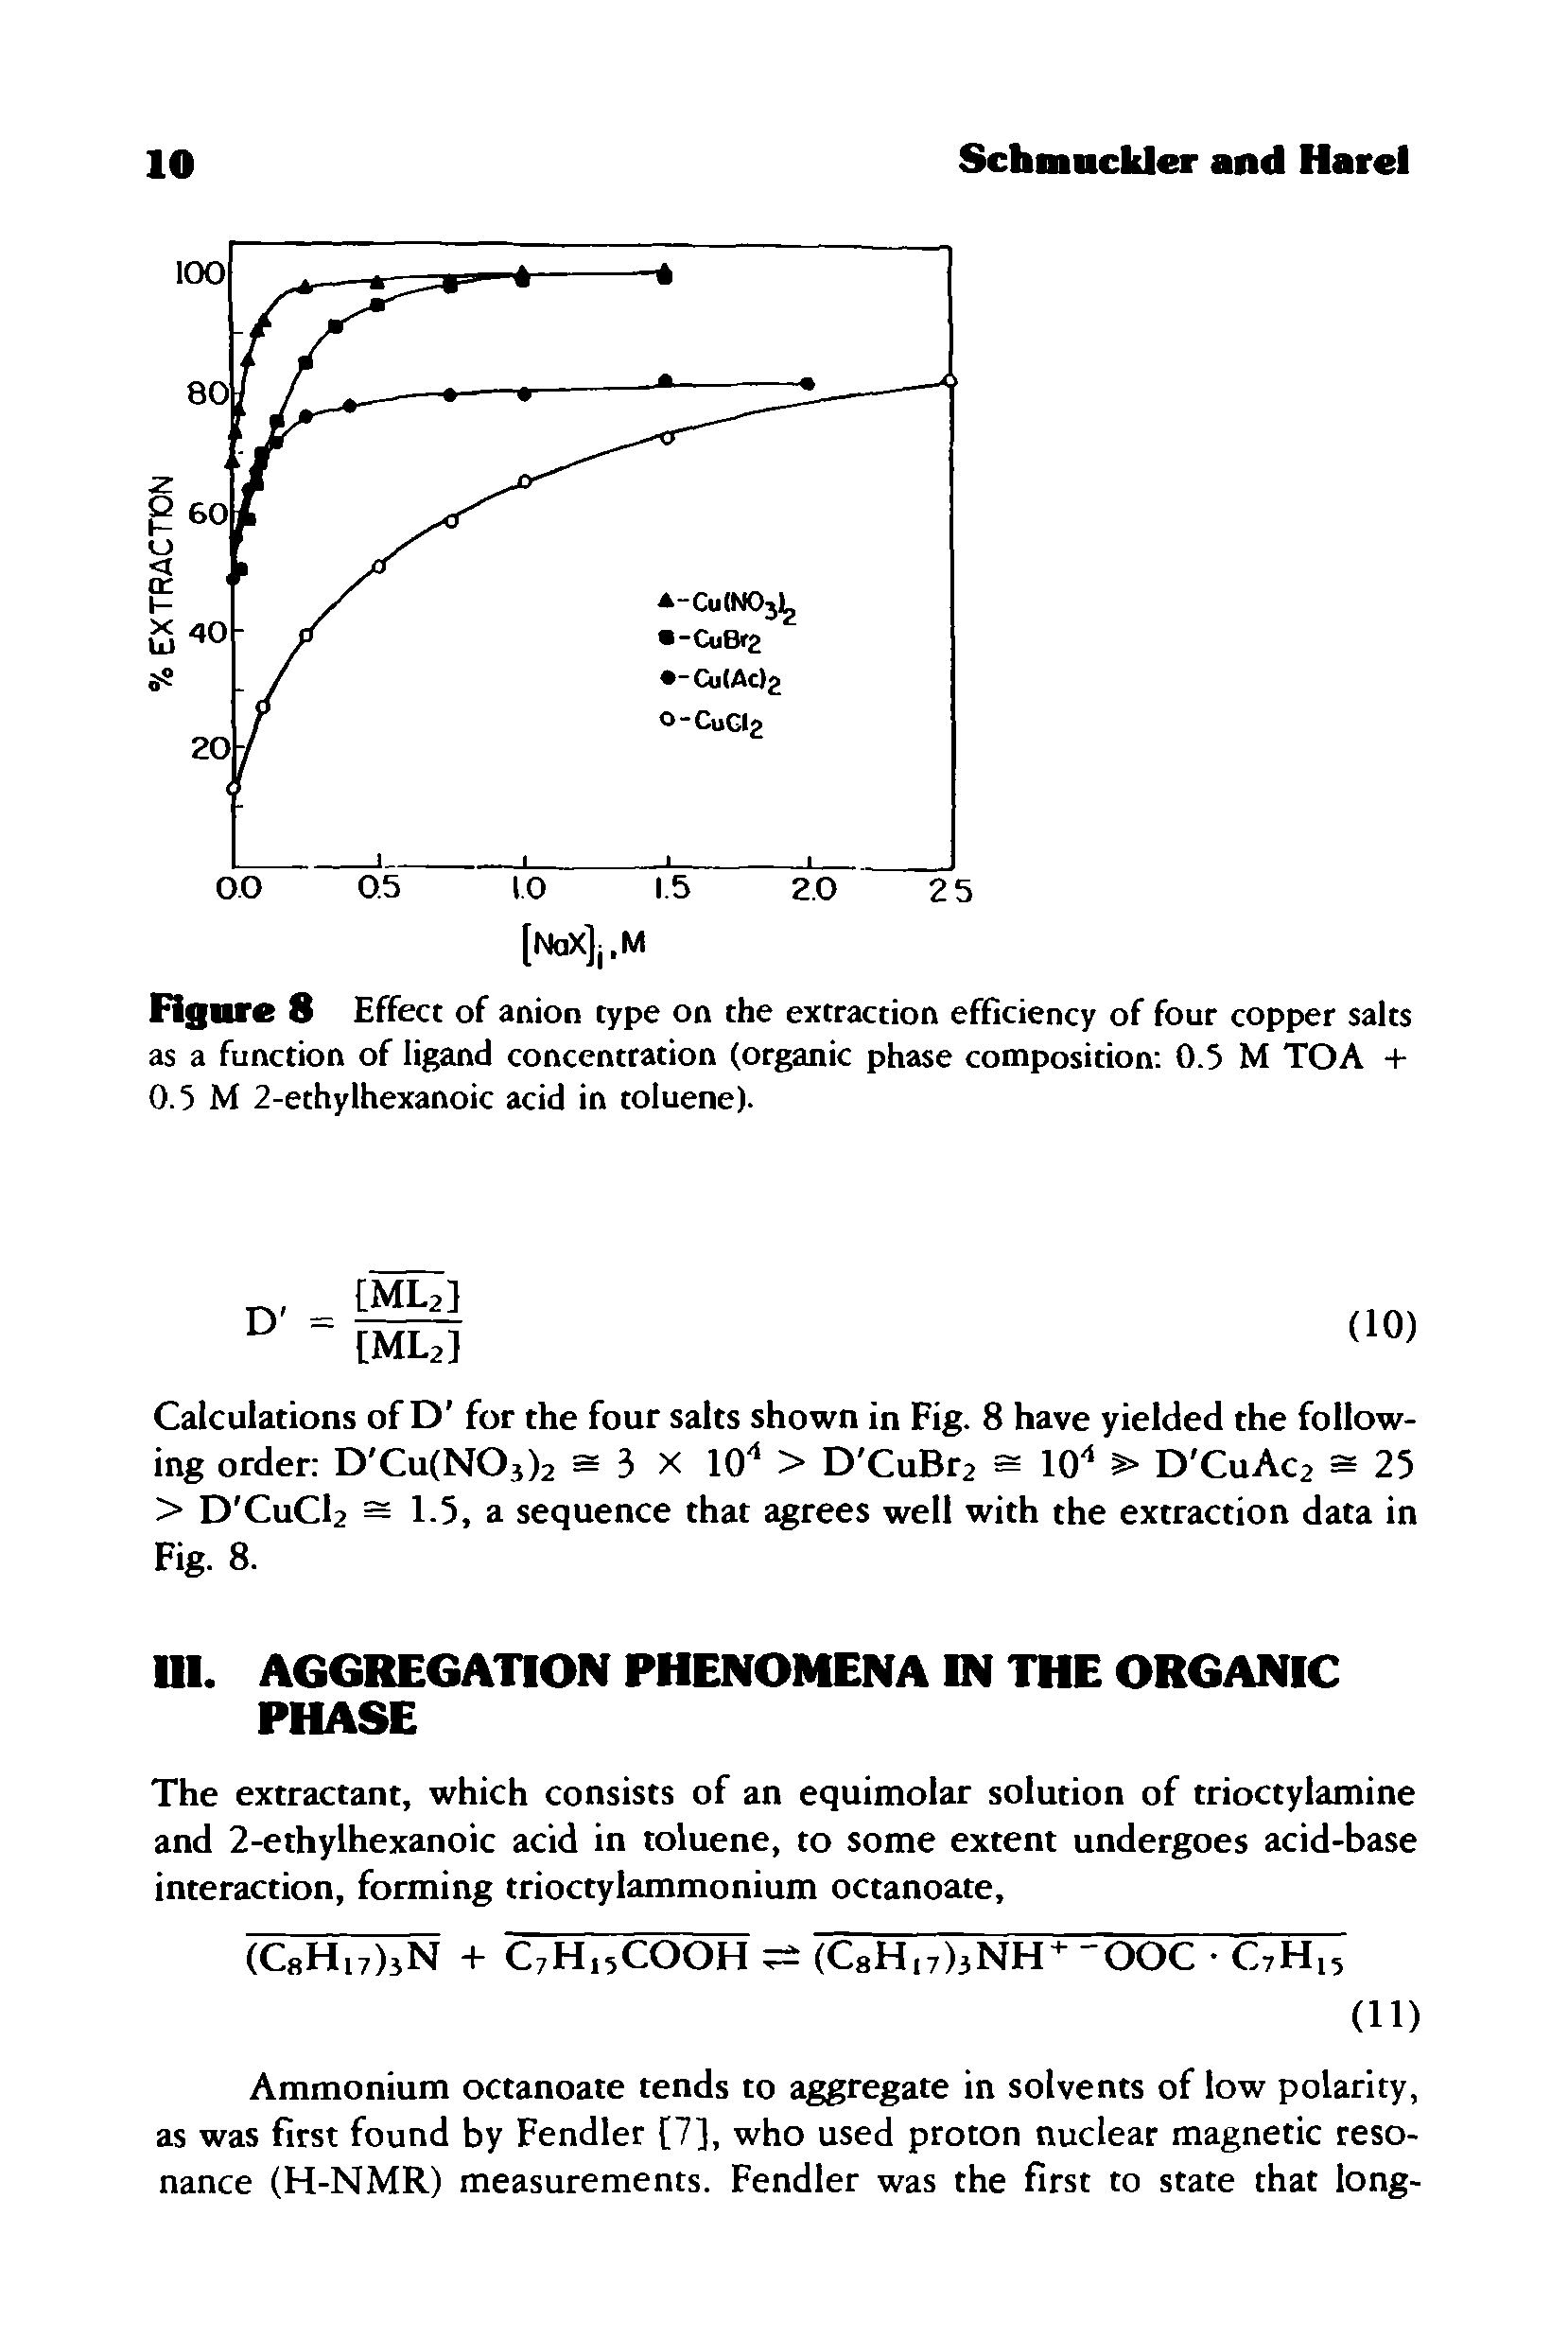 Figure 8 Effect of anion type on the extraction efficiency of four copper salts as a function of ligand concentration (organic phase composition 0.5 M TOA + 0.5 M 2-ethylhexanoic acid in toluene).